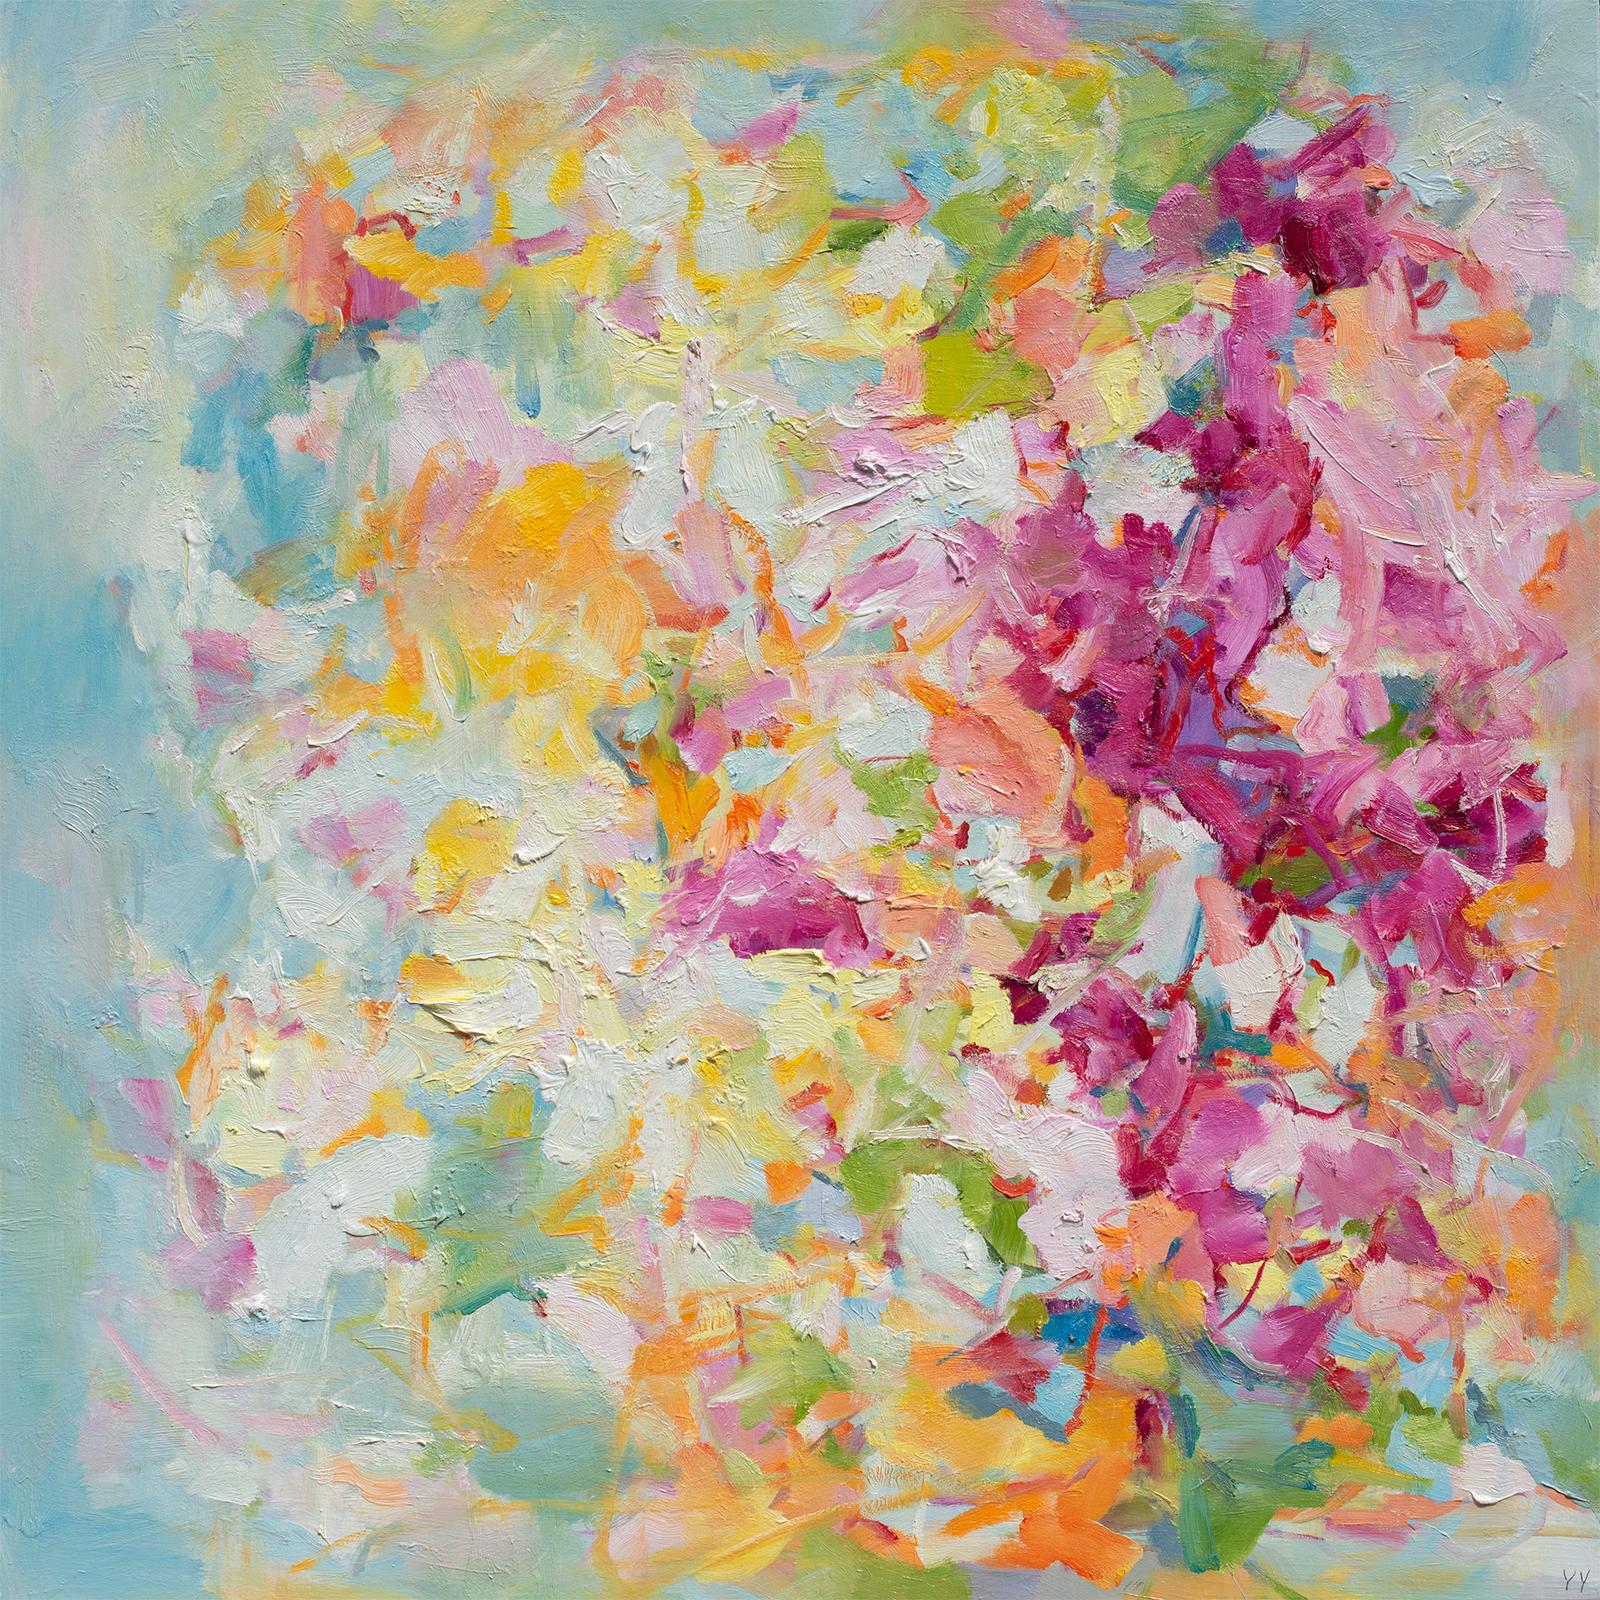 Abstract Landscape Painting by Yangyang Pan 'Flourish'